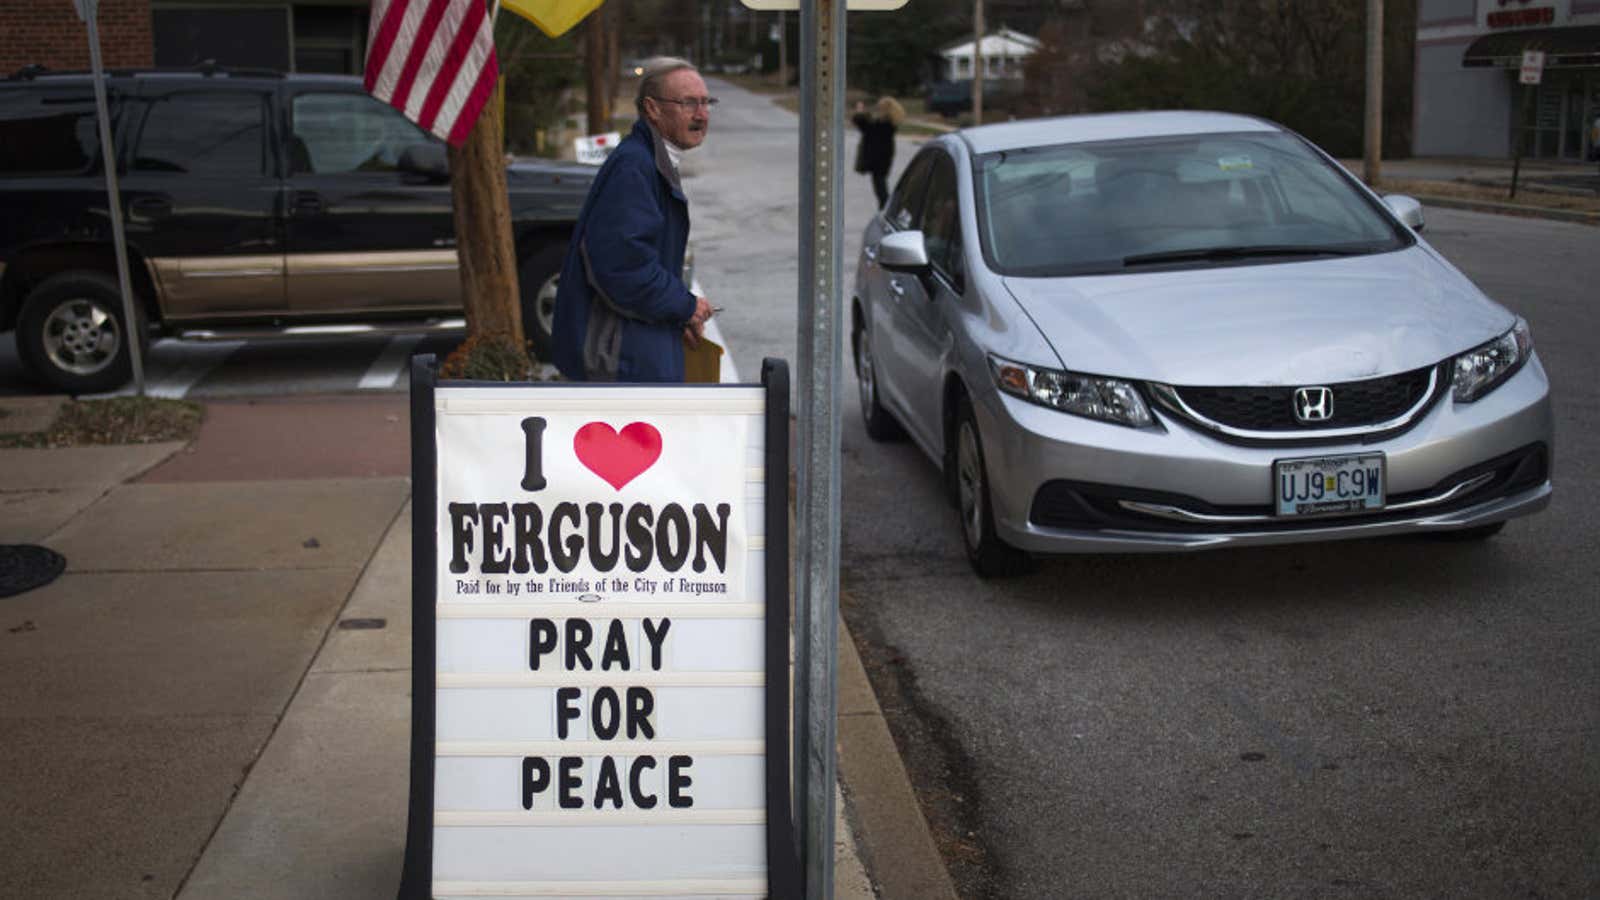 For many  St. Louis residents, there hasn’t been peace in a long time.